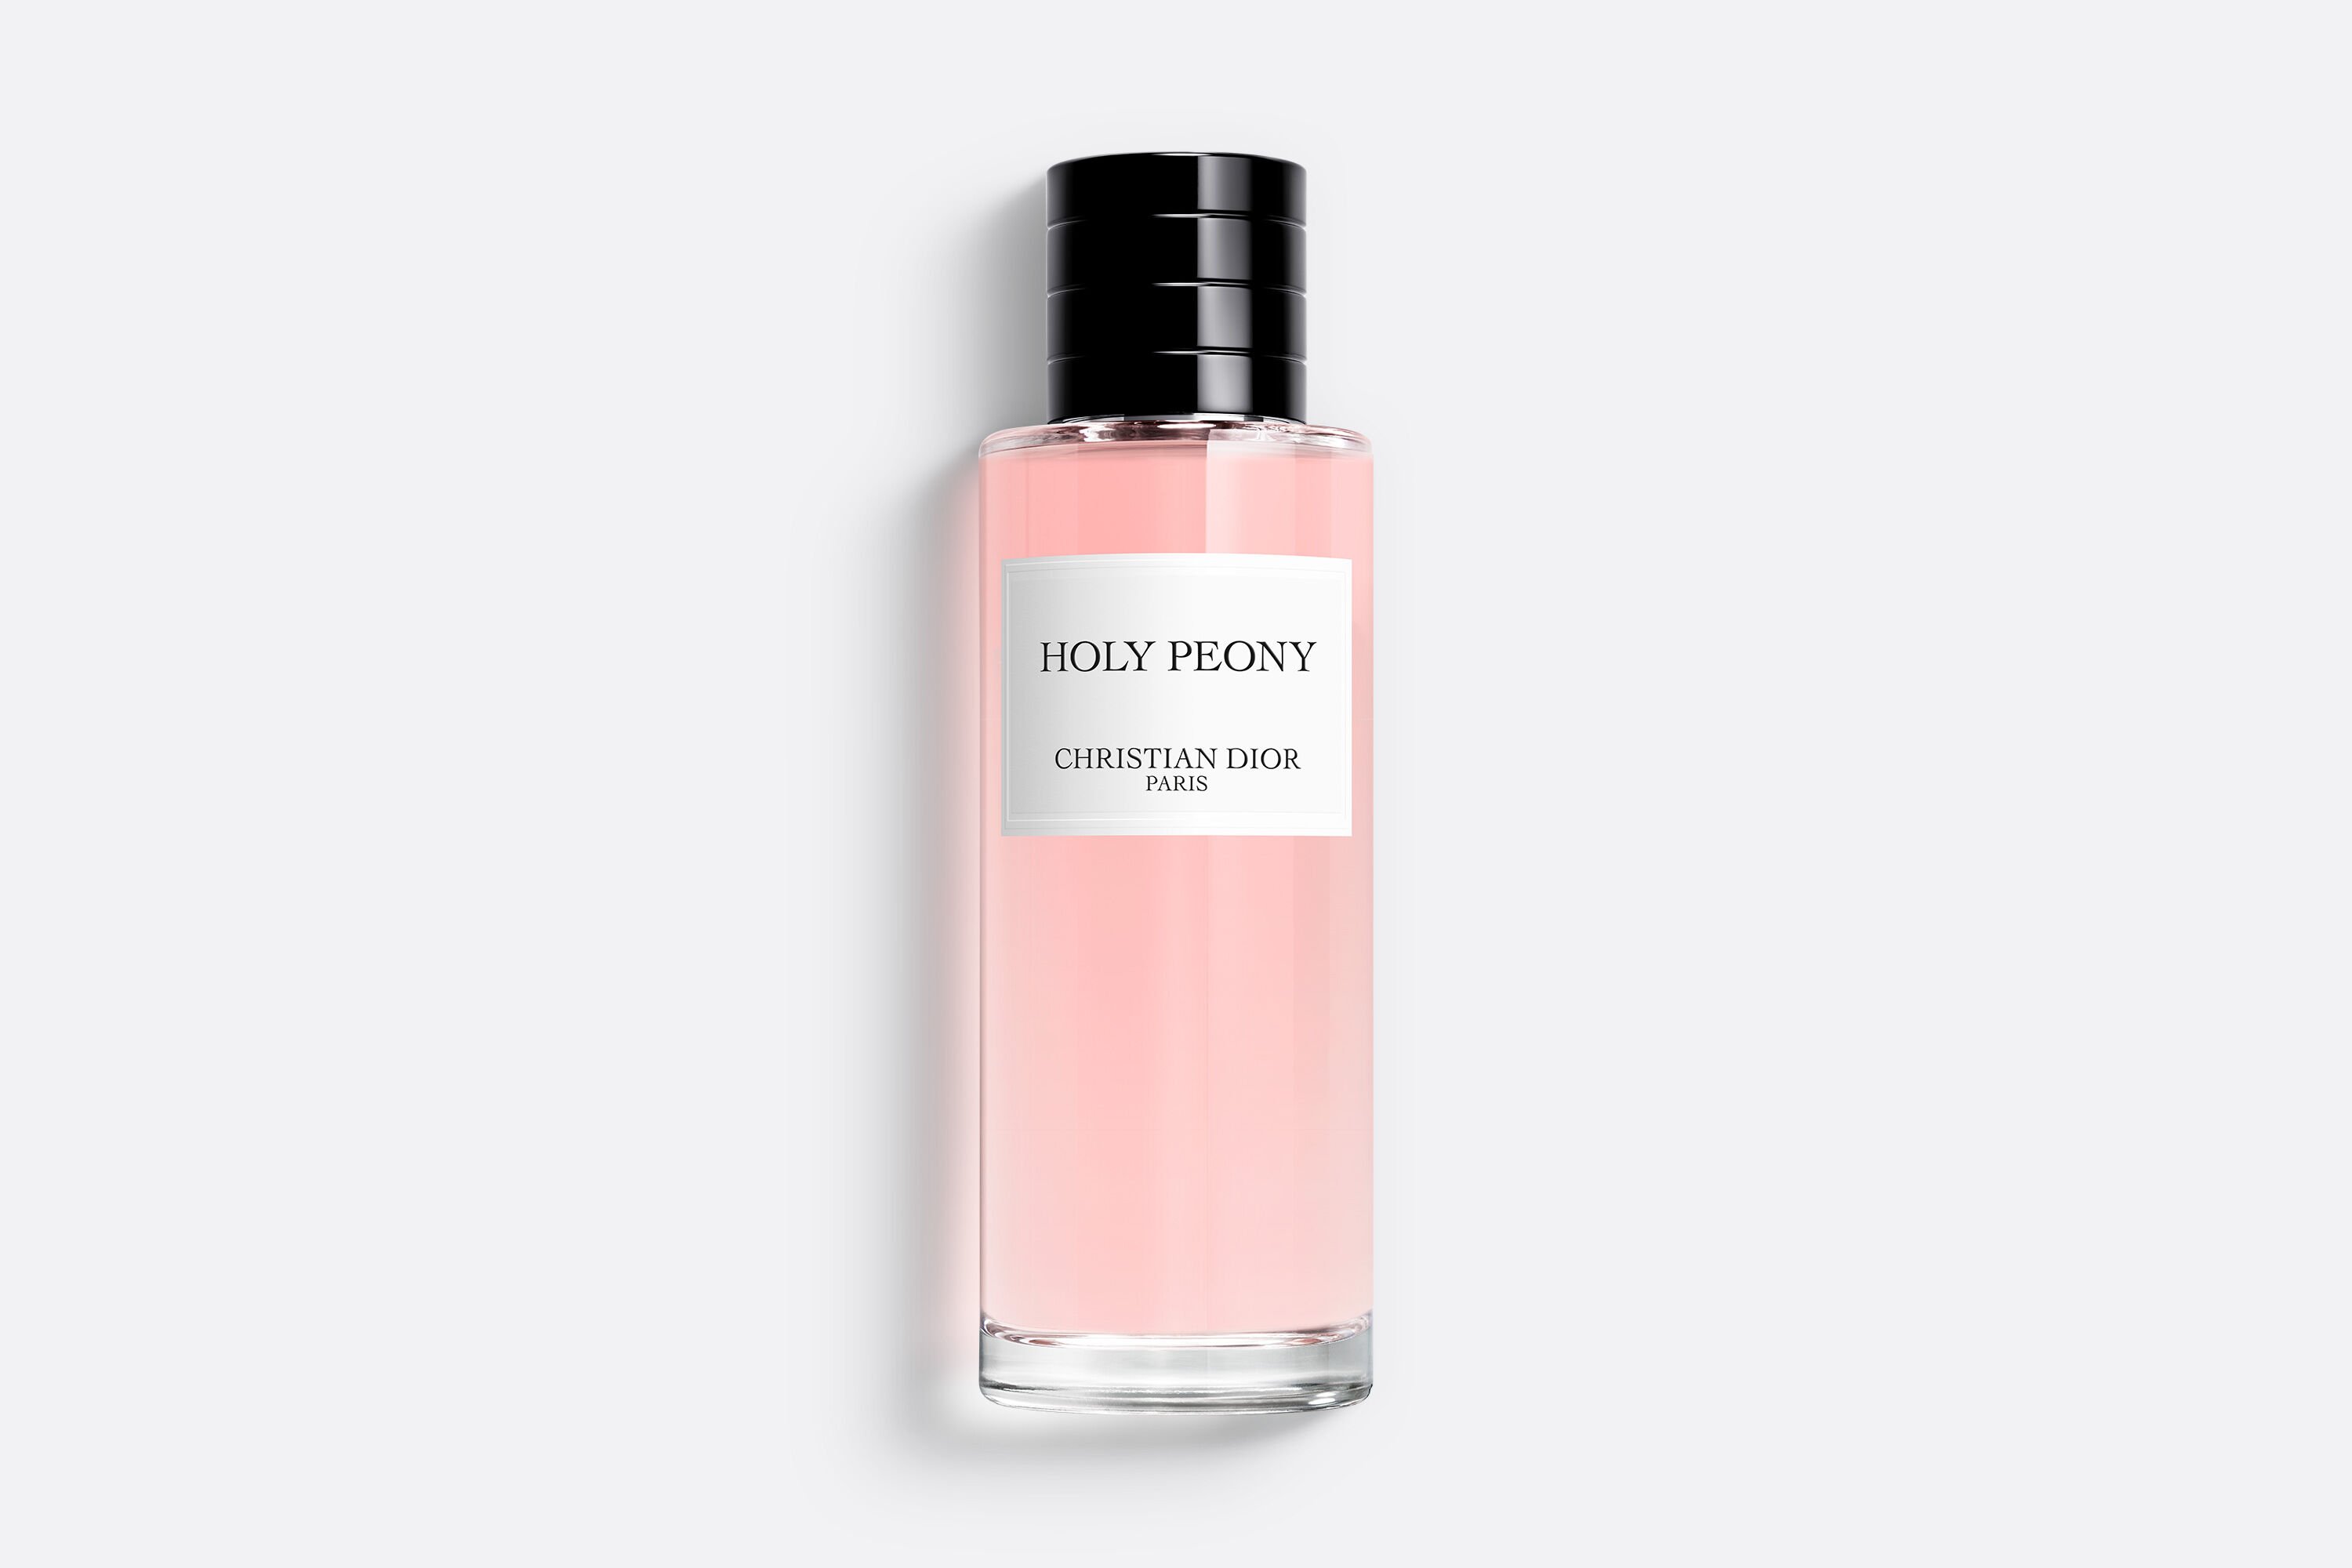 Holy Peony fragrance: the floral fragrance that portrays the peony